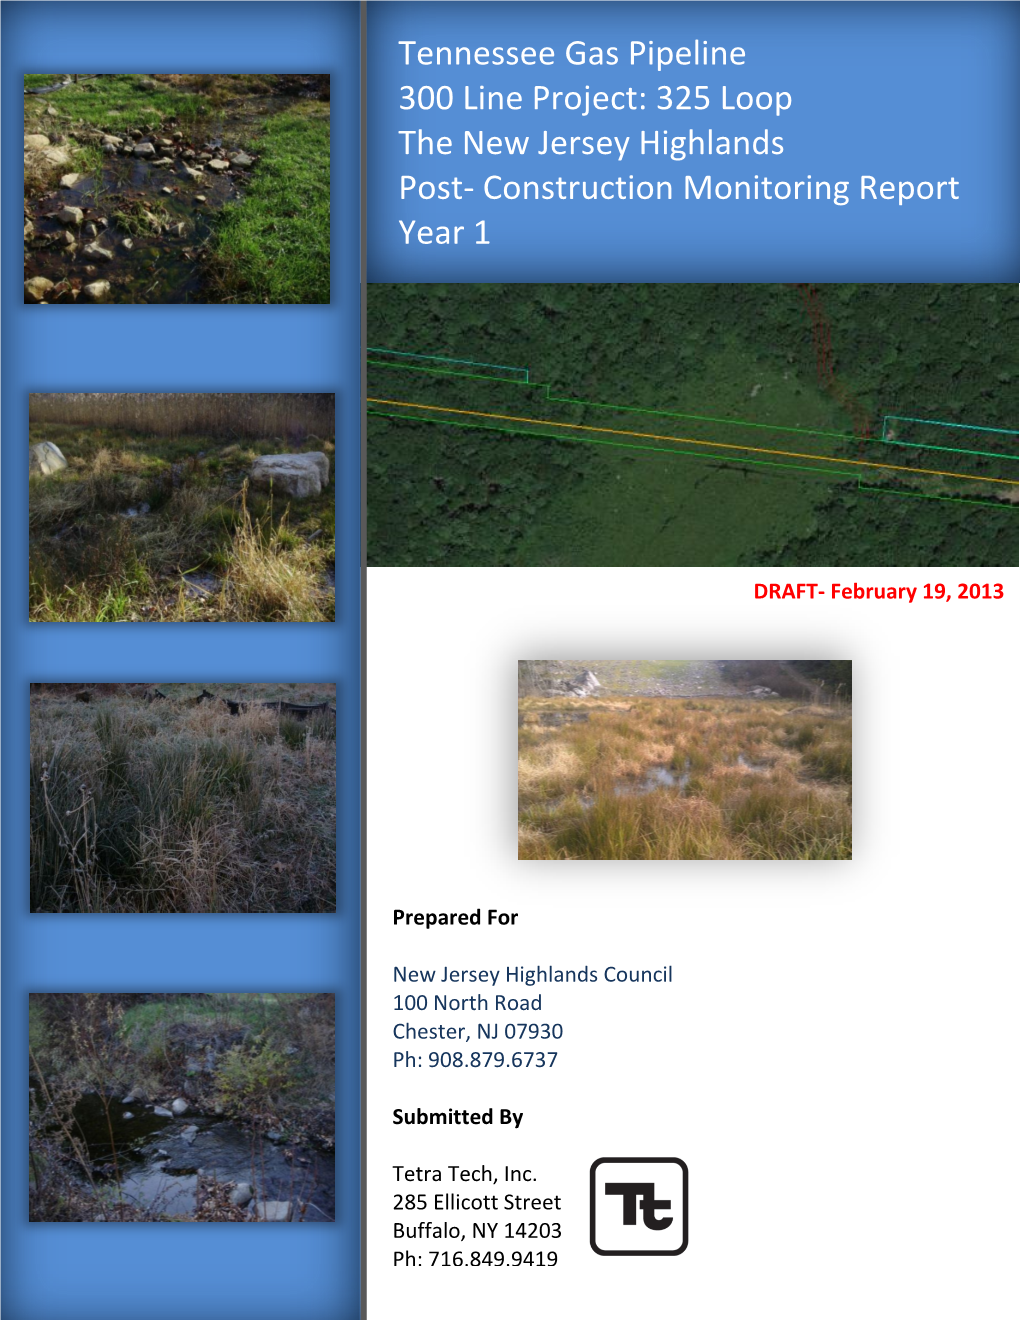 Tennessee Gas Pipeline 300 Line Project: 325 Loop the New Jersey Highlands Post- Construction Monitoring Report Year 1